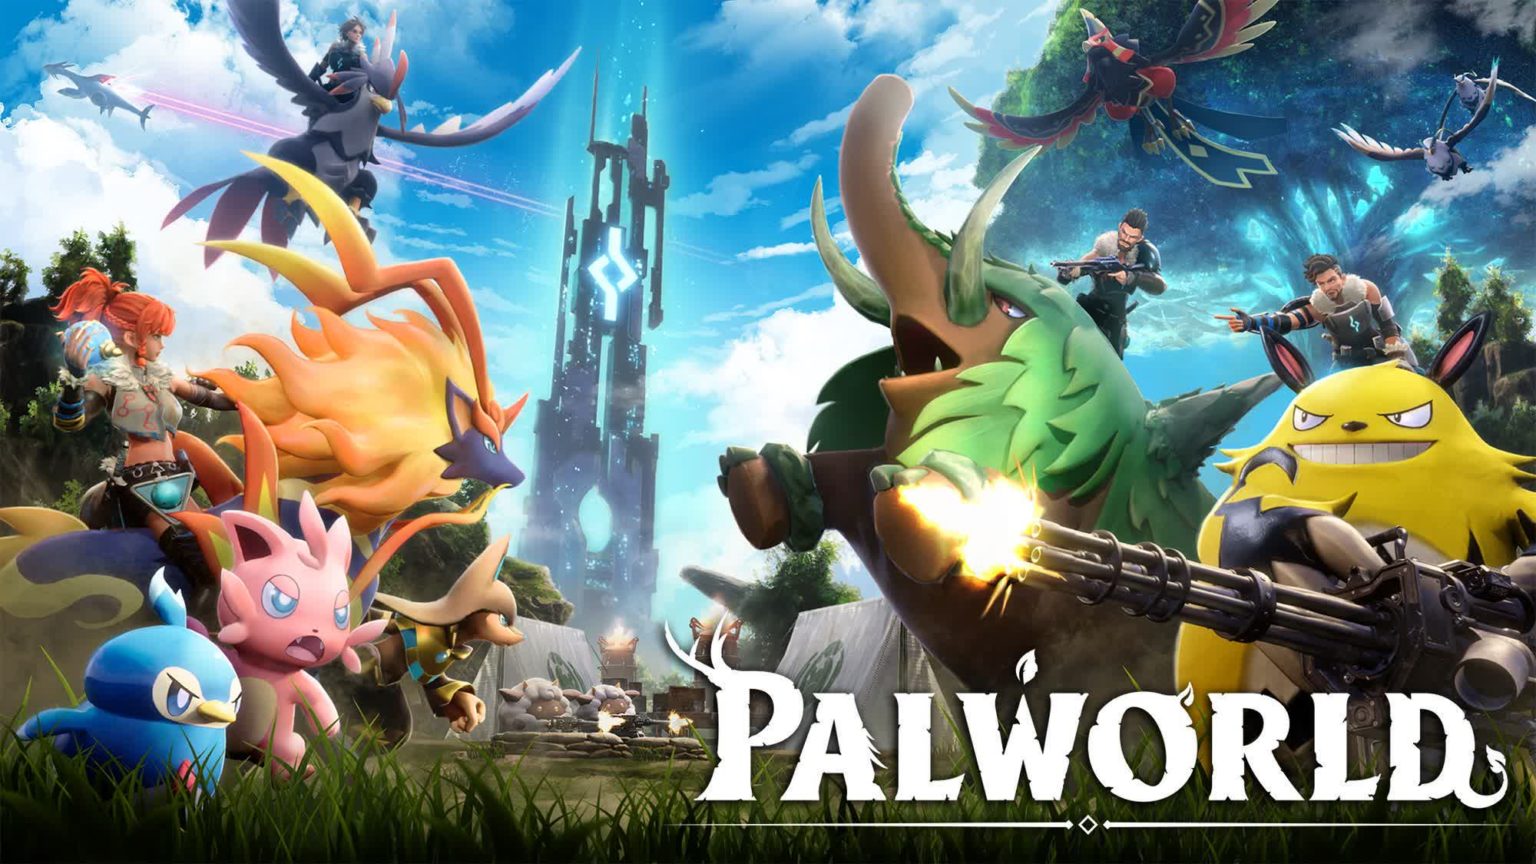 Palworld is spending nearly $500K per month on servers to support its growing player base